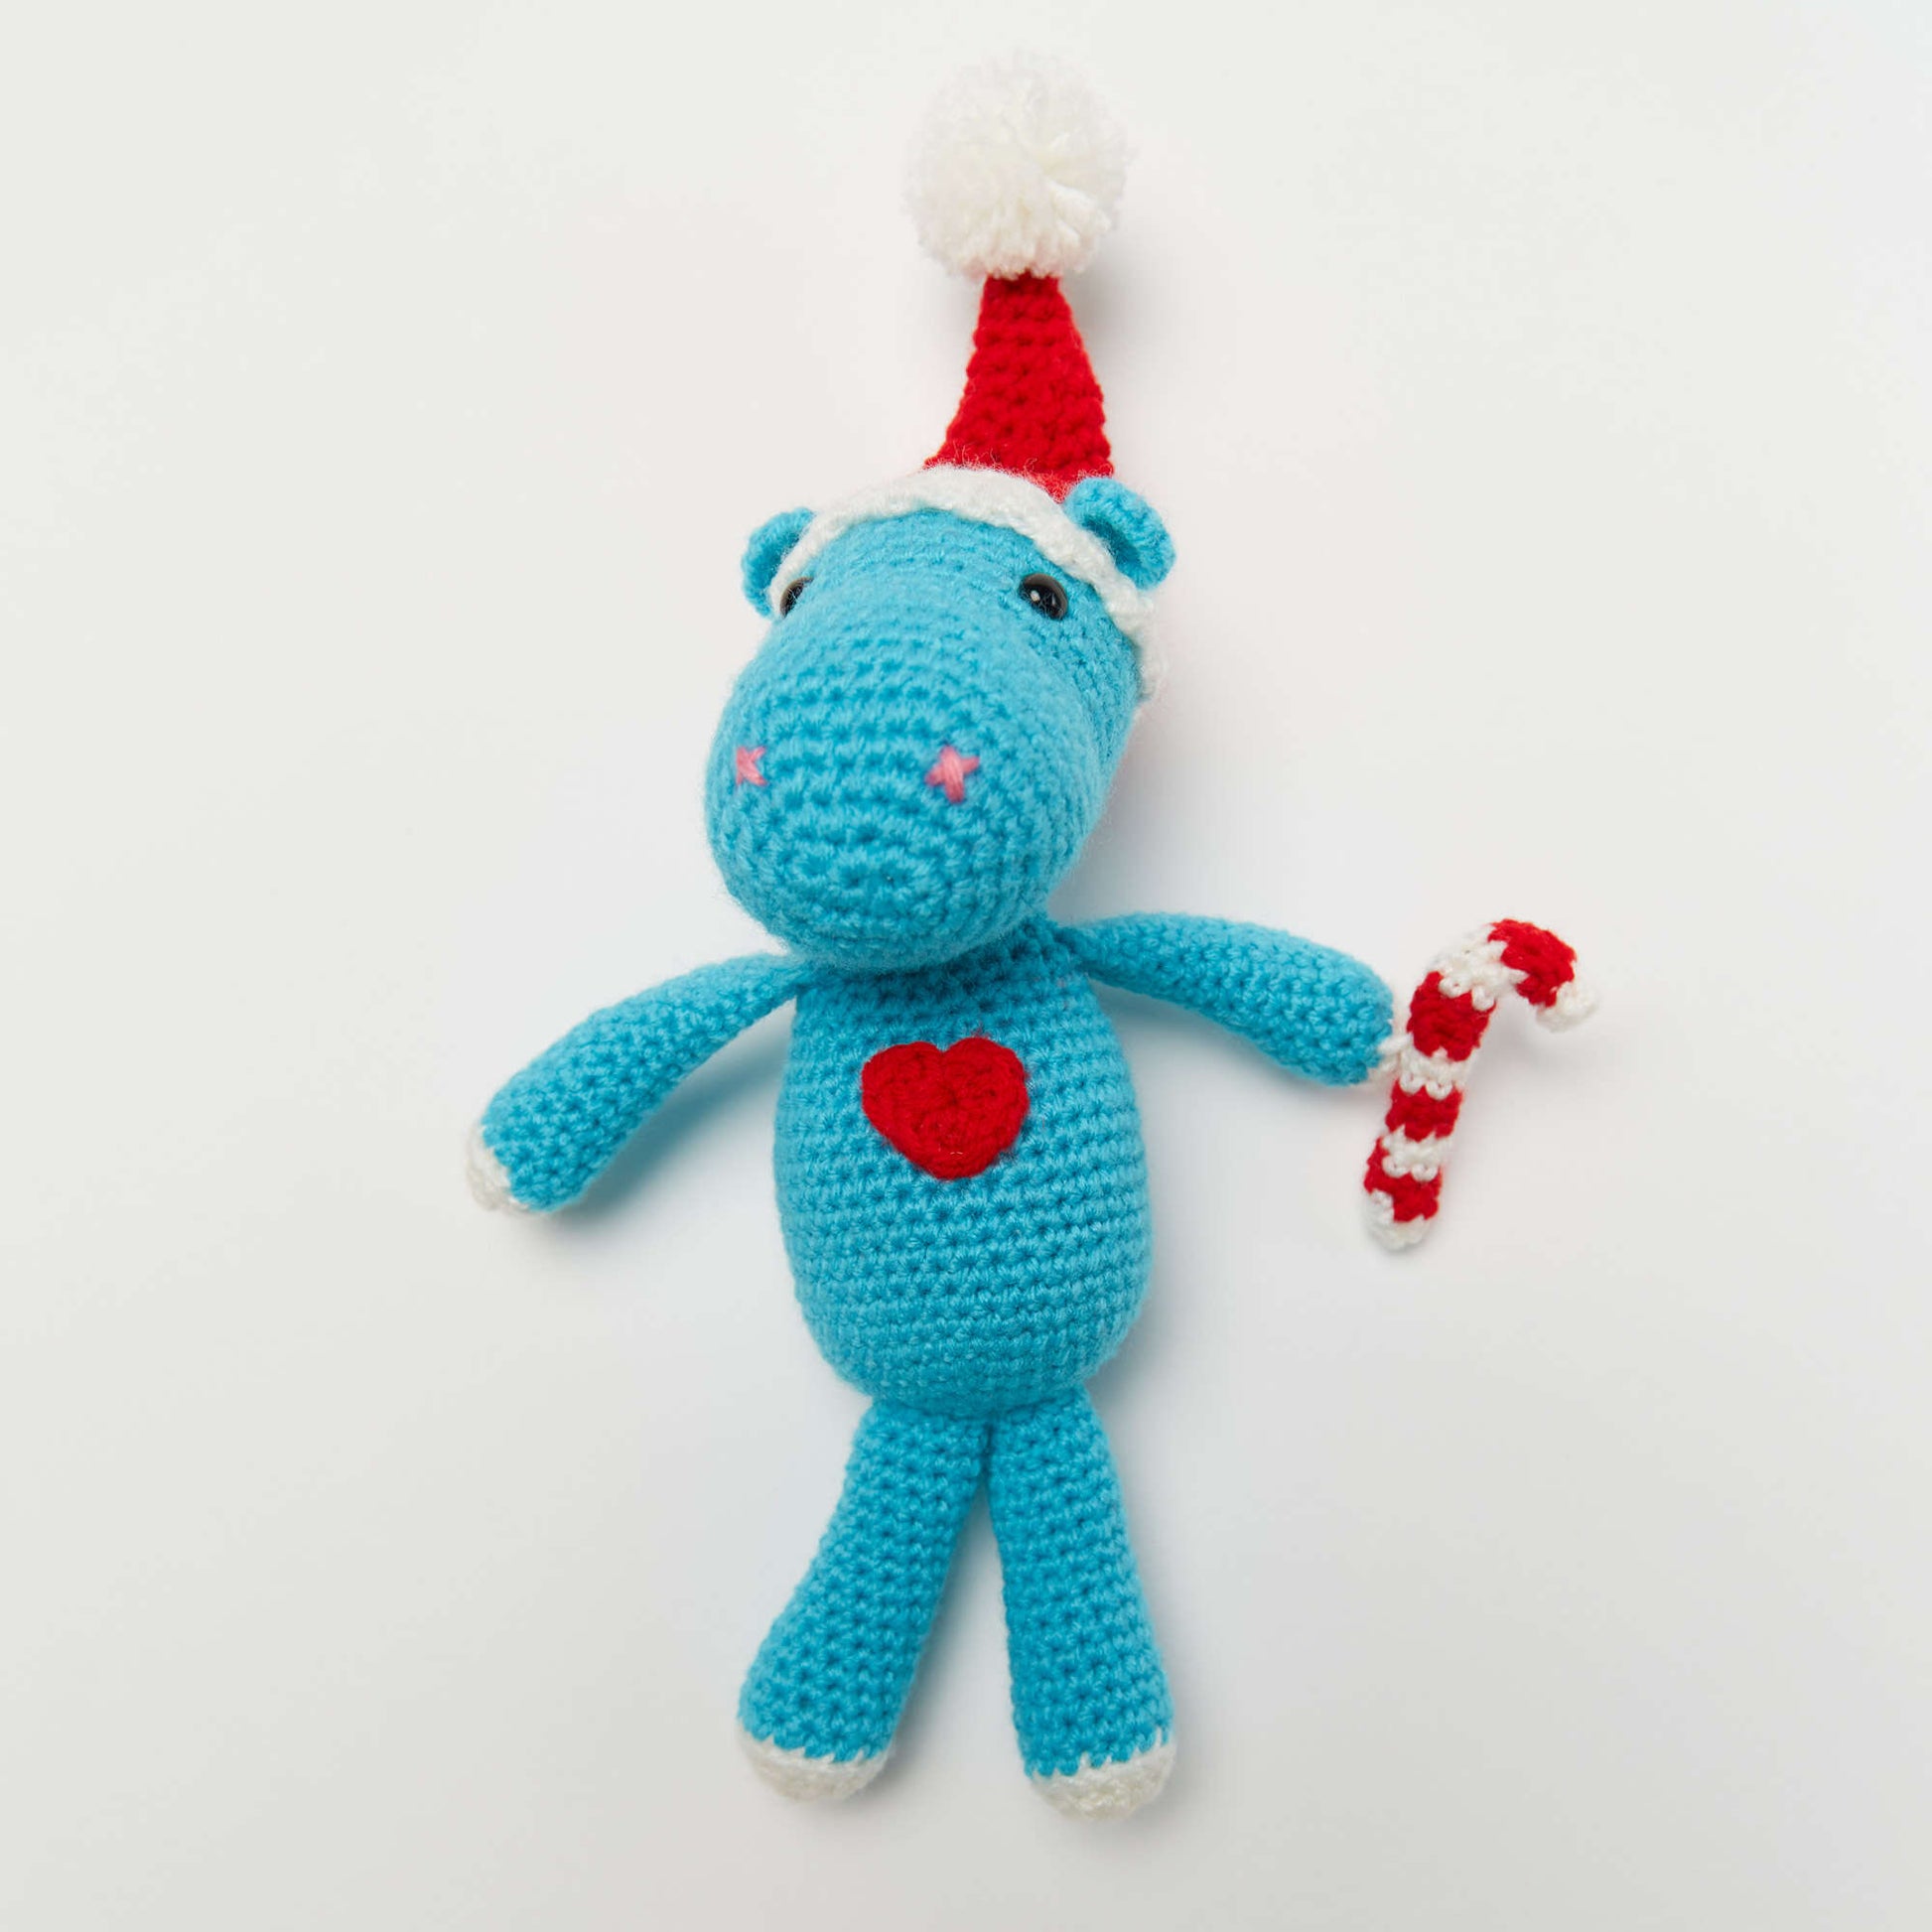 Free Red Heart Crochet I Want A Hippopotamus For Christmas Pattern